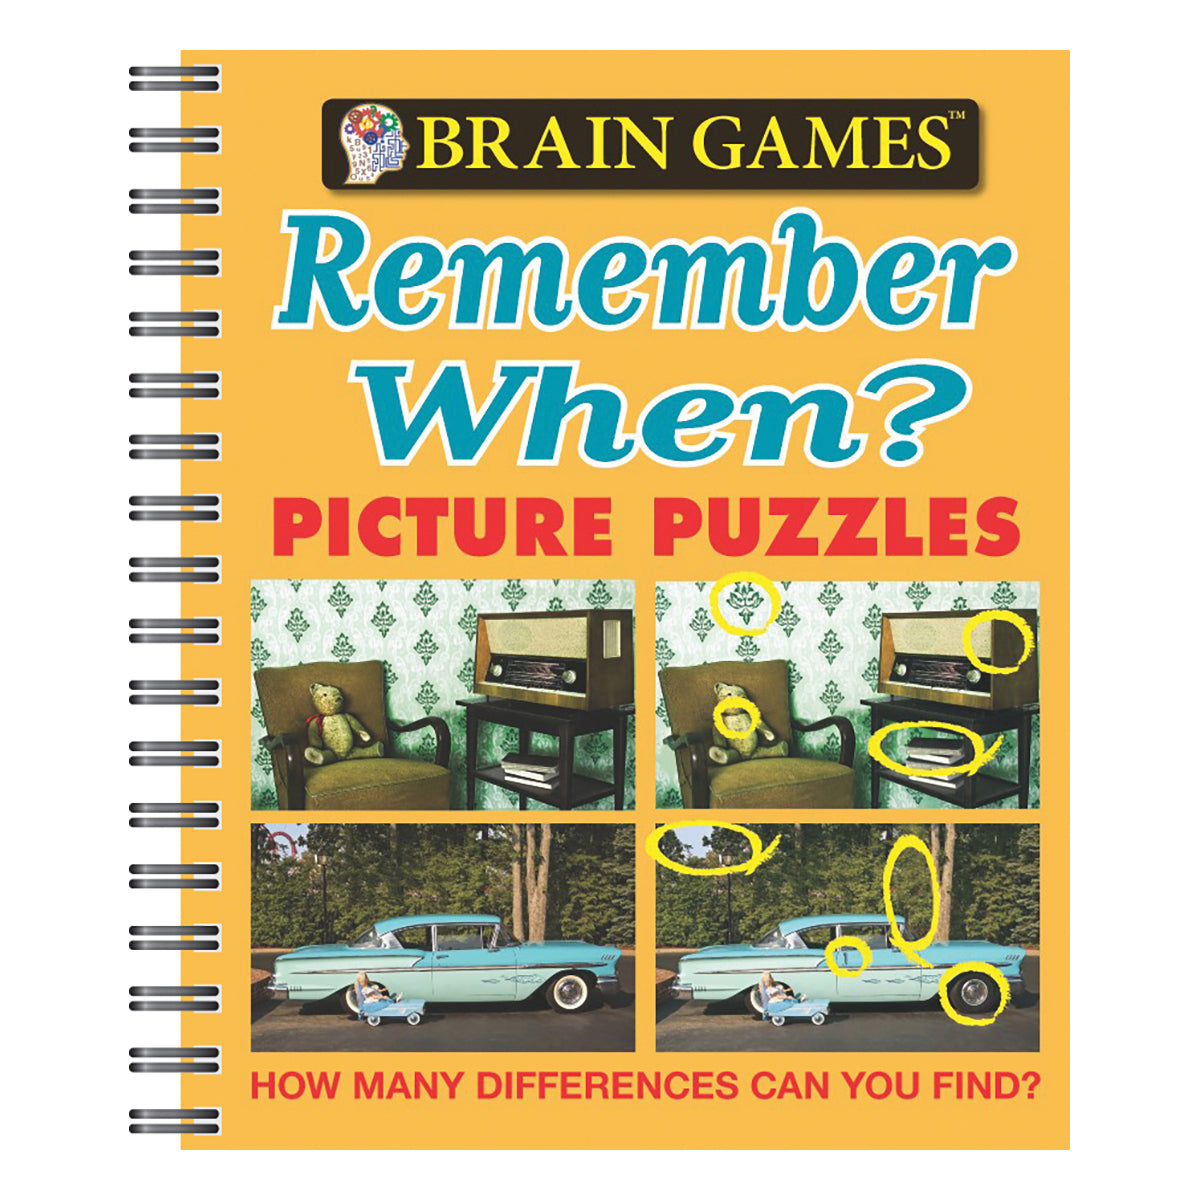 Brain Games  Picture Puzzles Remember When?  How Many Differences Can You Find?